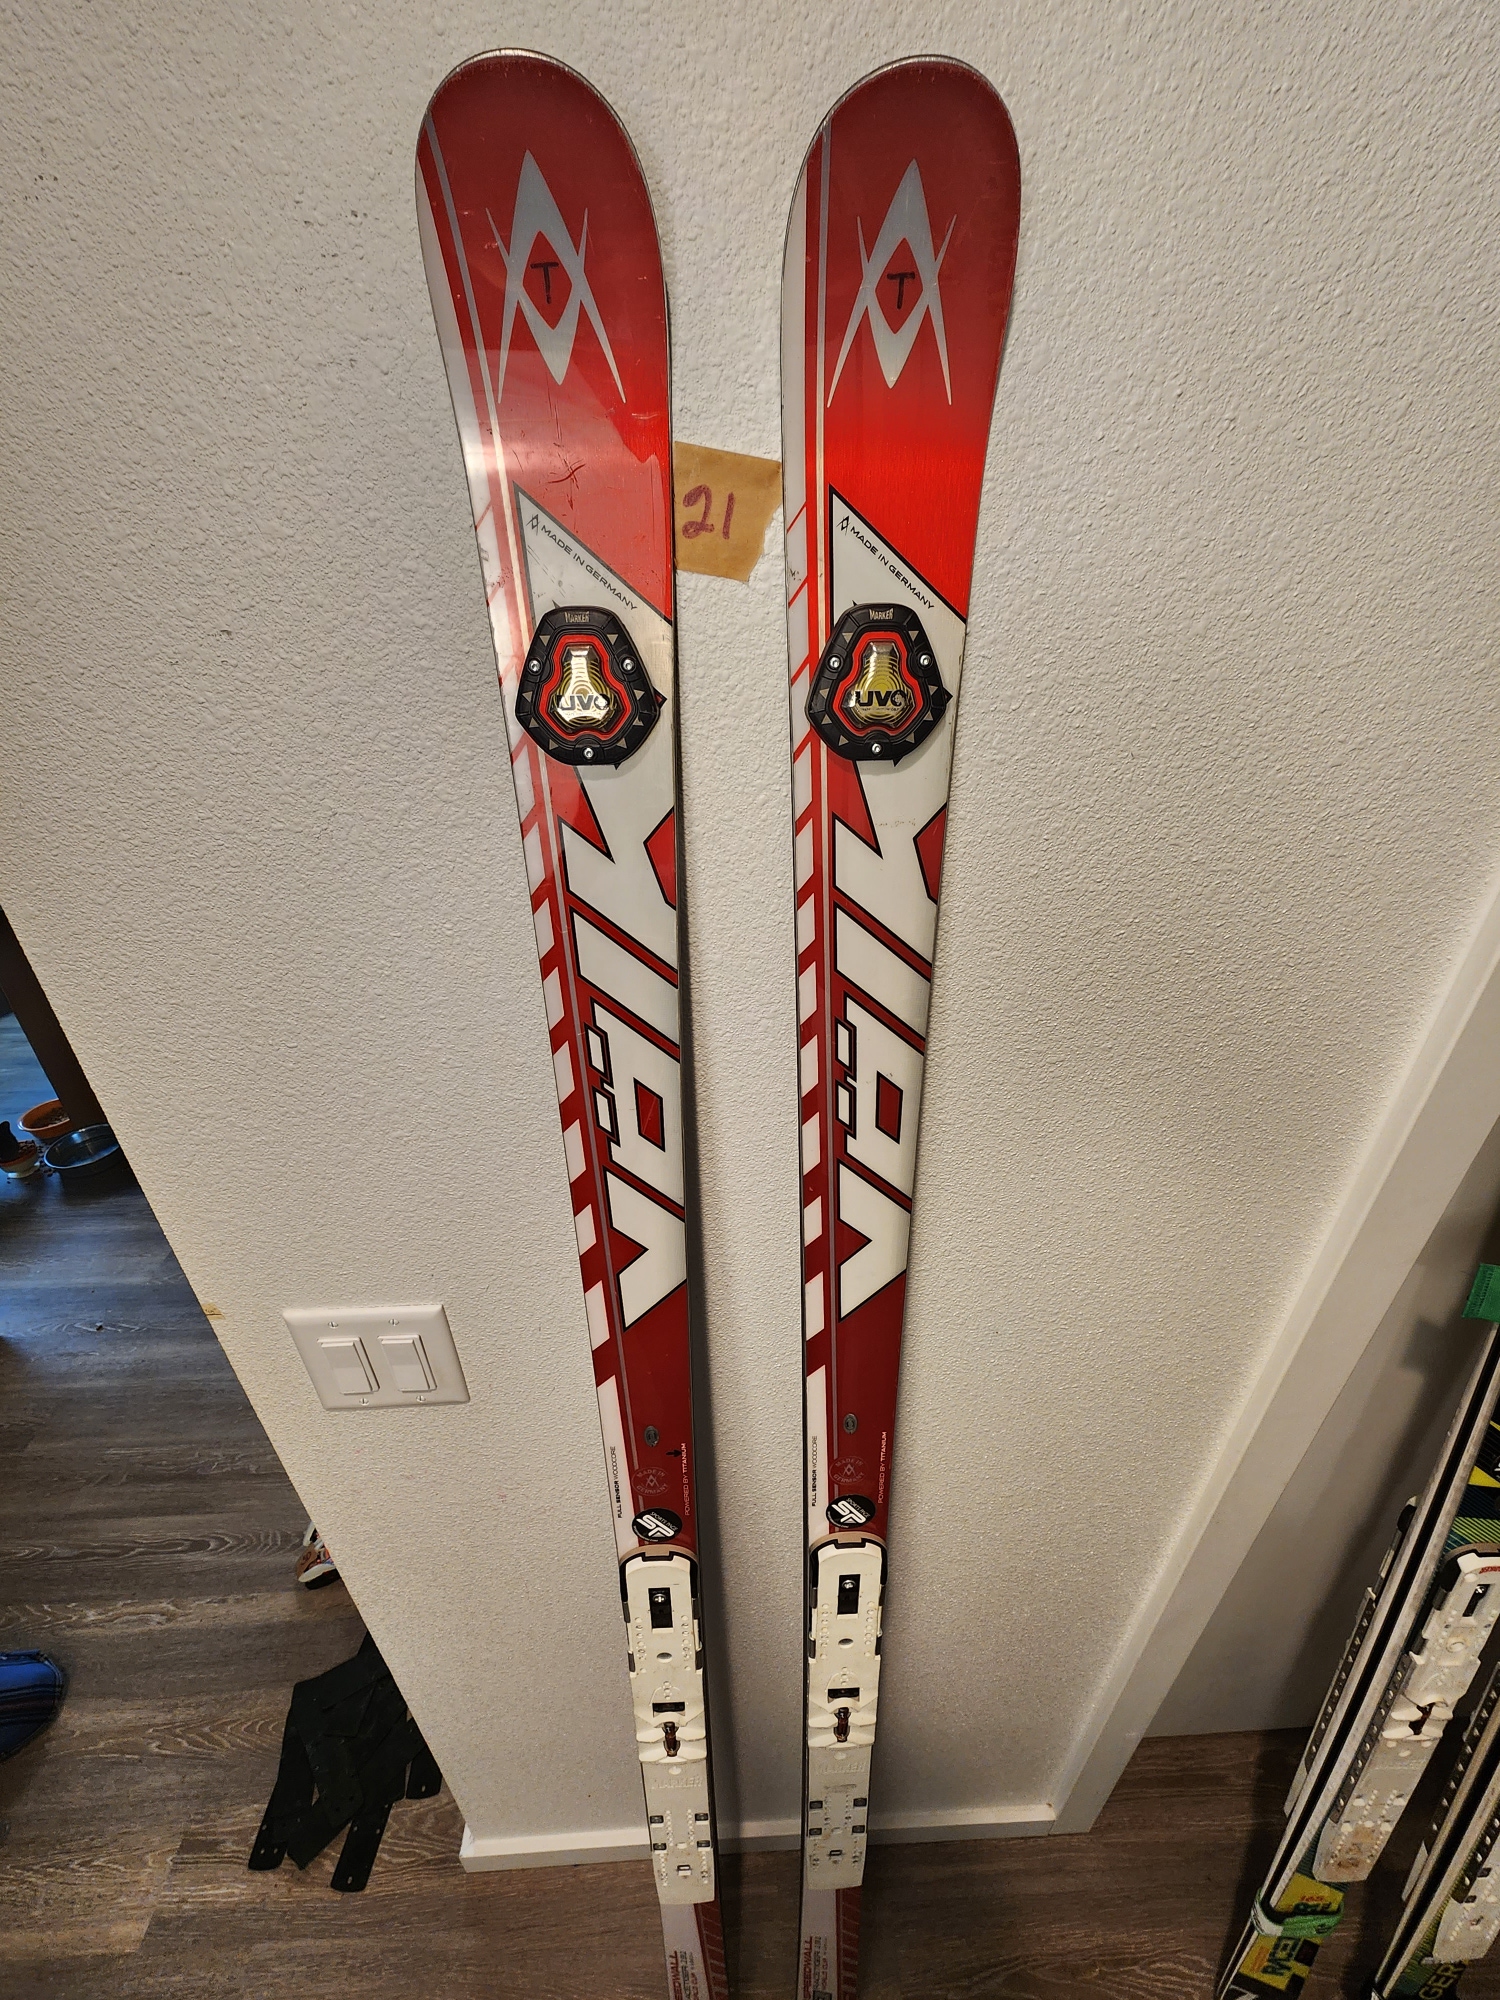 Used 2014-2017 - 191-196 cm Volkl Racetiger GS Skis Without Bindings